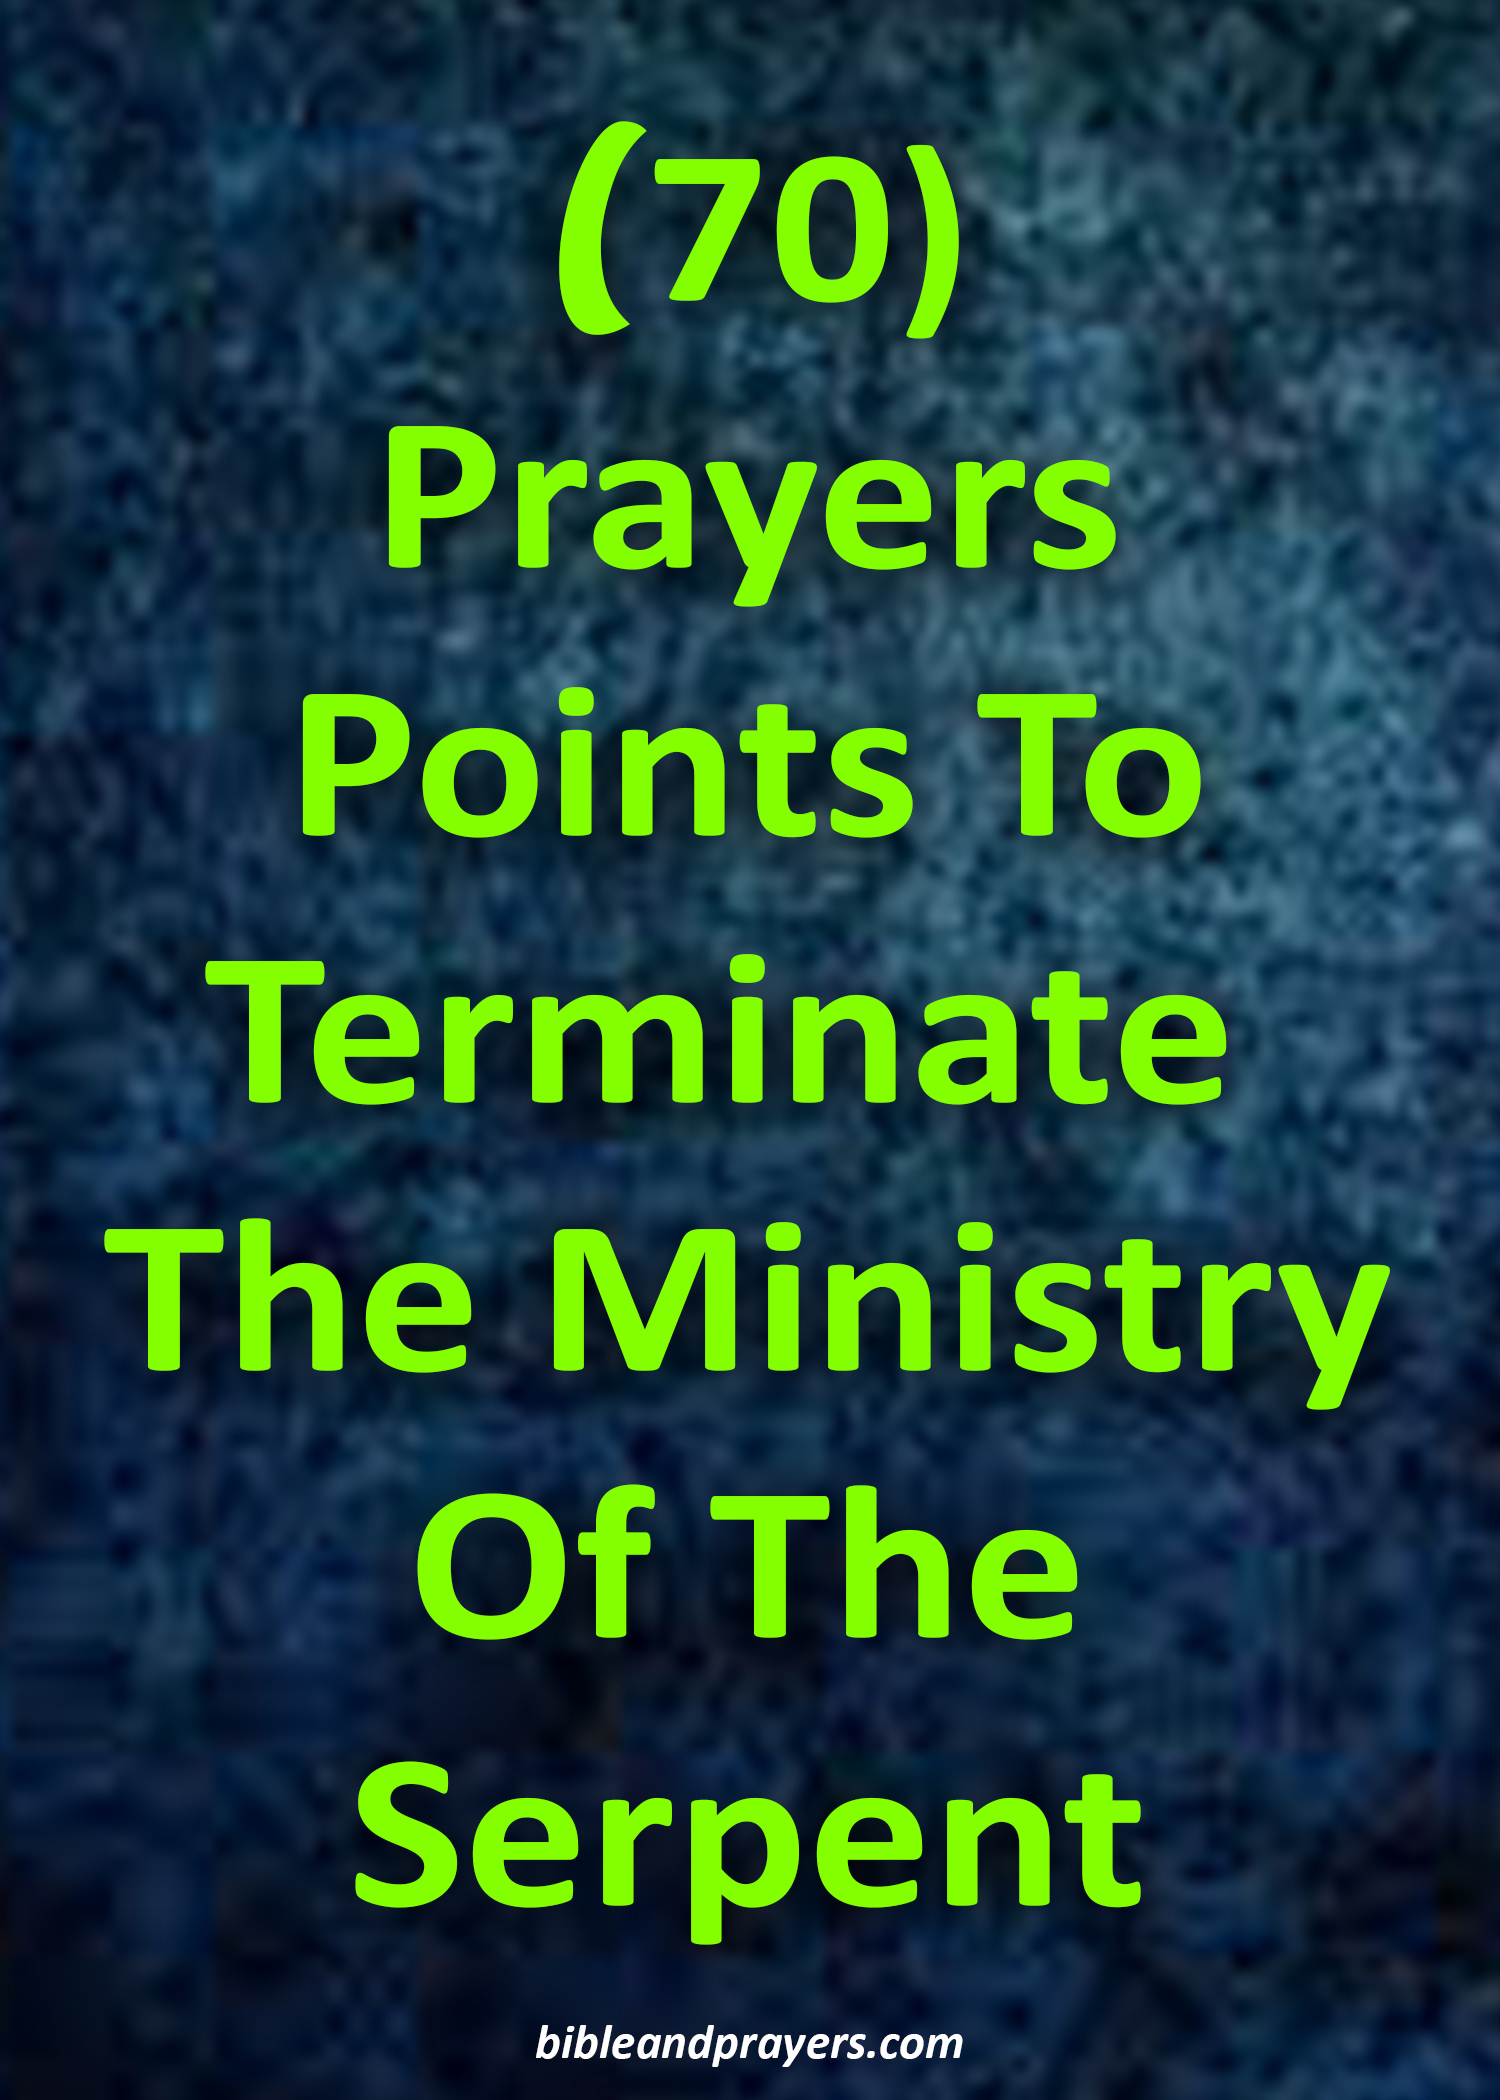 70 Prayer Points To Terminate The Ministry Of The Serpent